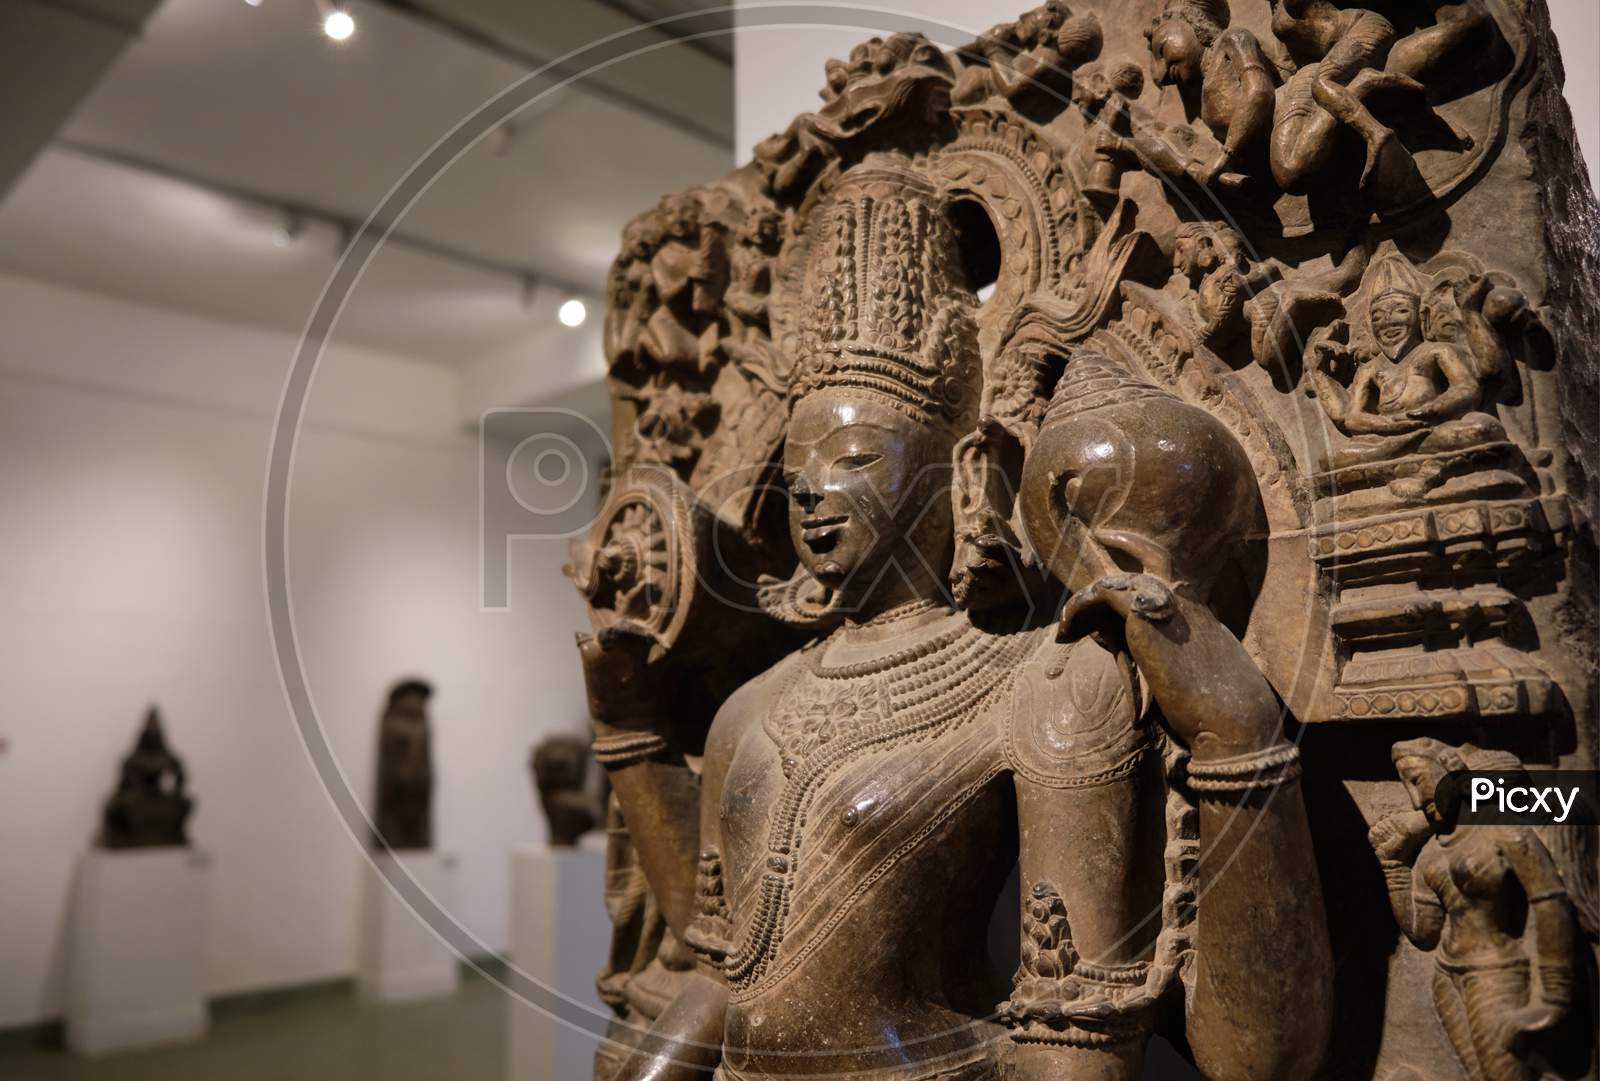 Stone Statue Of Hindu Deity In The National Museum Of India In New Delhi